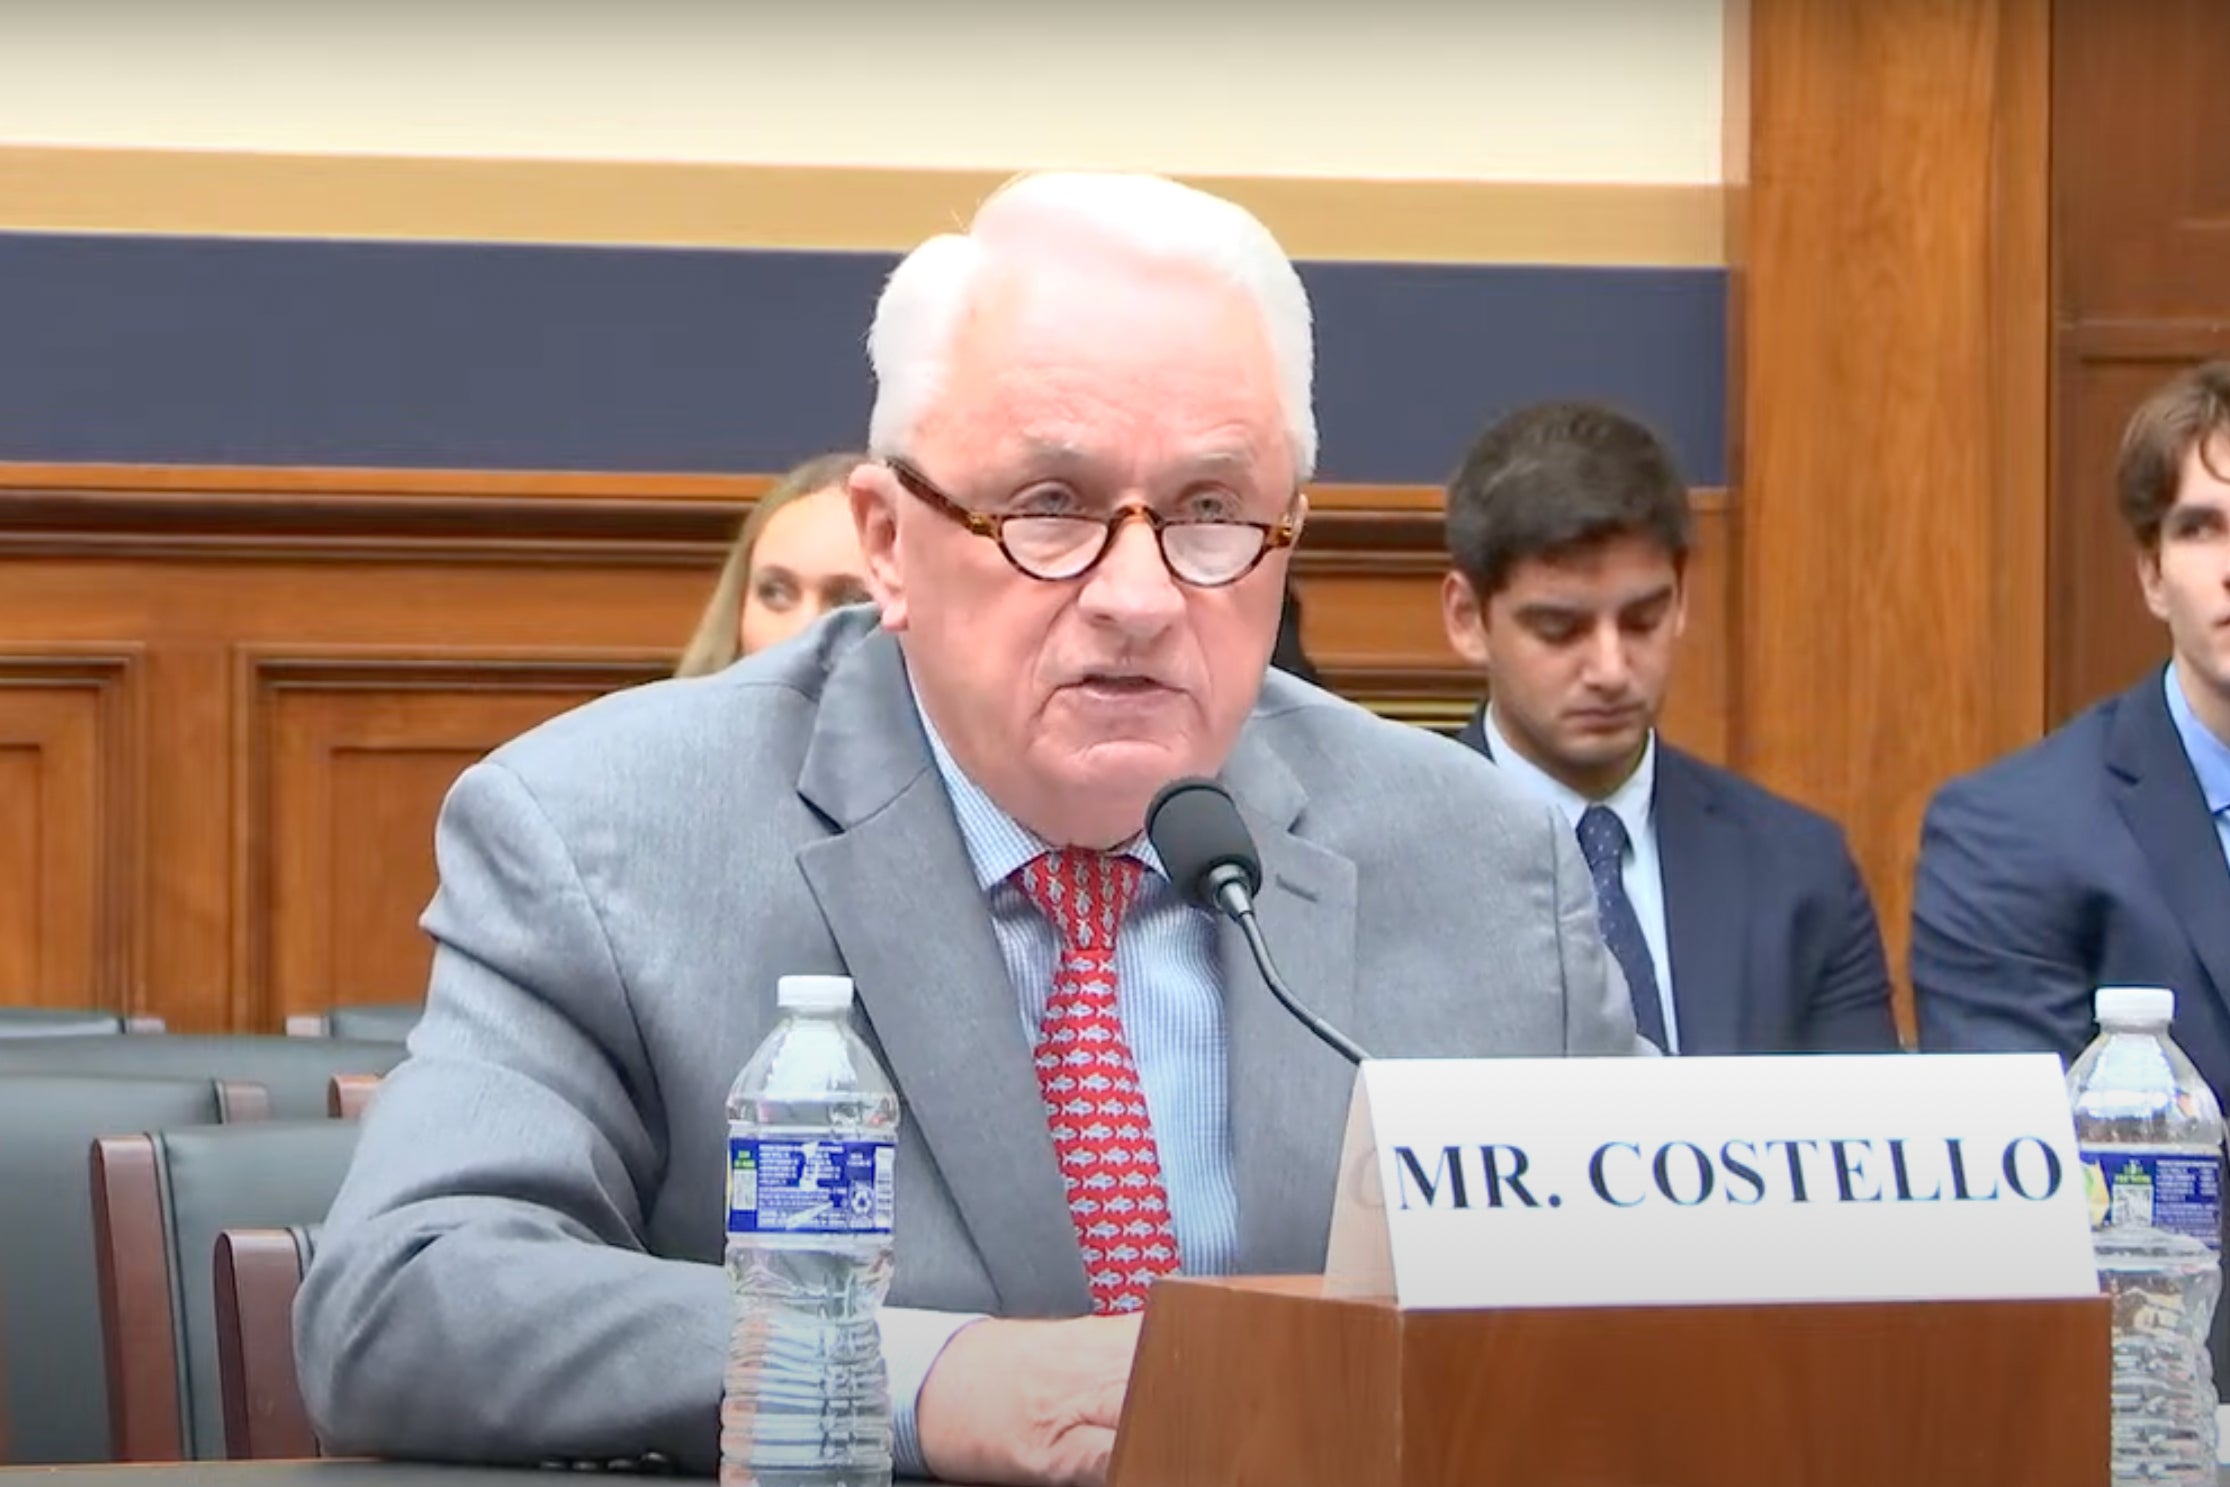 Robert Costello, former legal adviser to Michael Cohen, testifying before a House committee on 16 May 2024